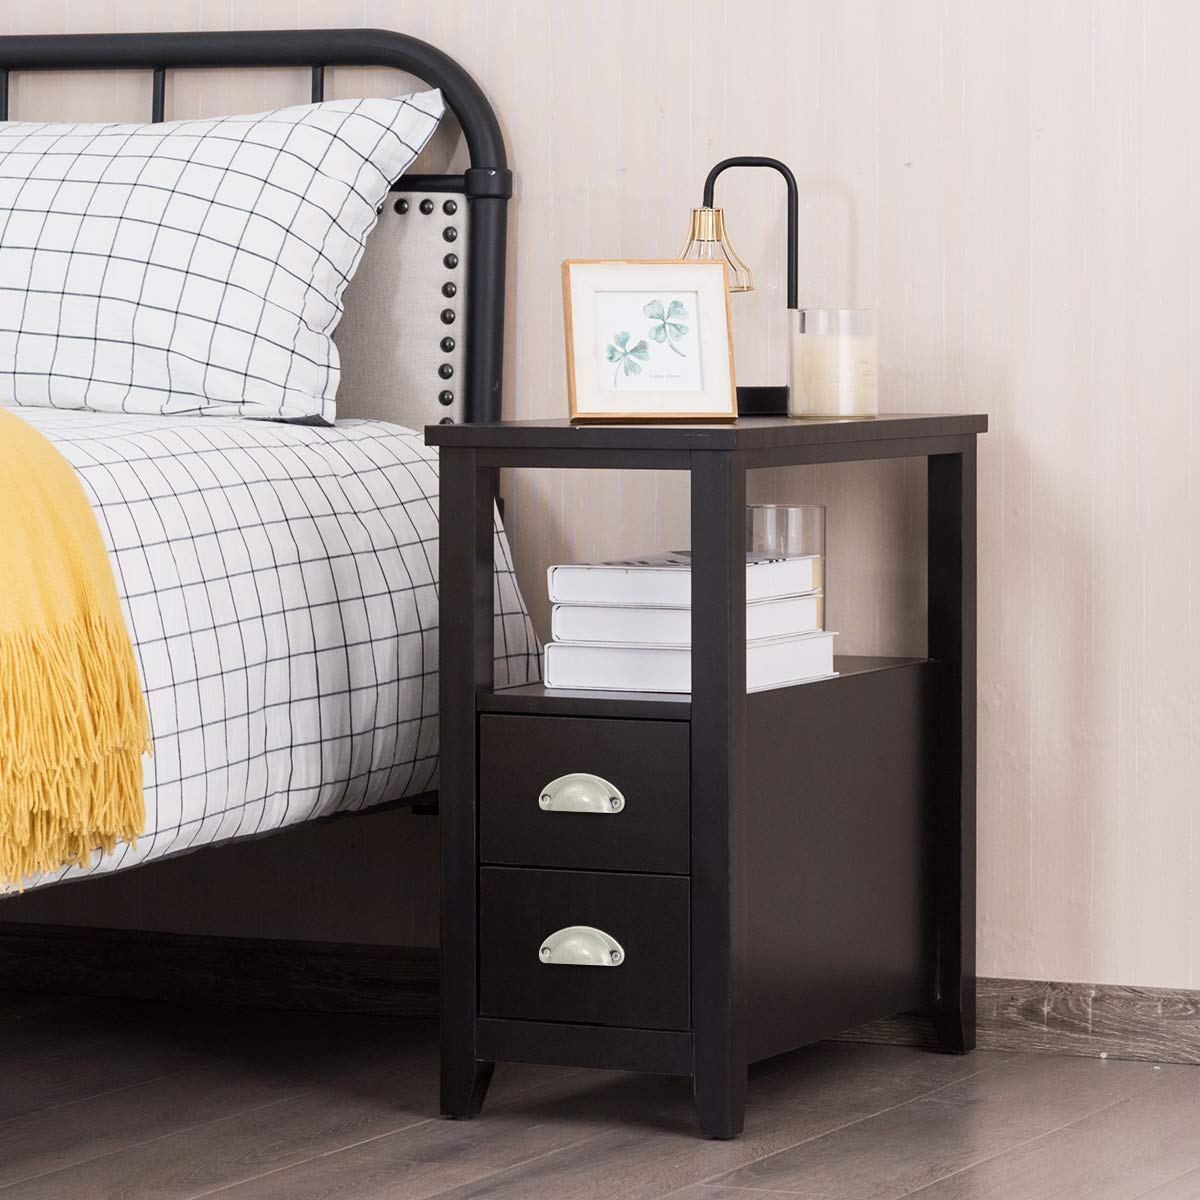 Giantex End Table Wooden W/ 2 Drawers and Shelf Space-Saving Rectangular Bedside Table